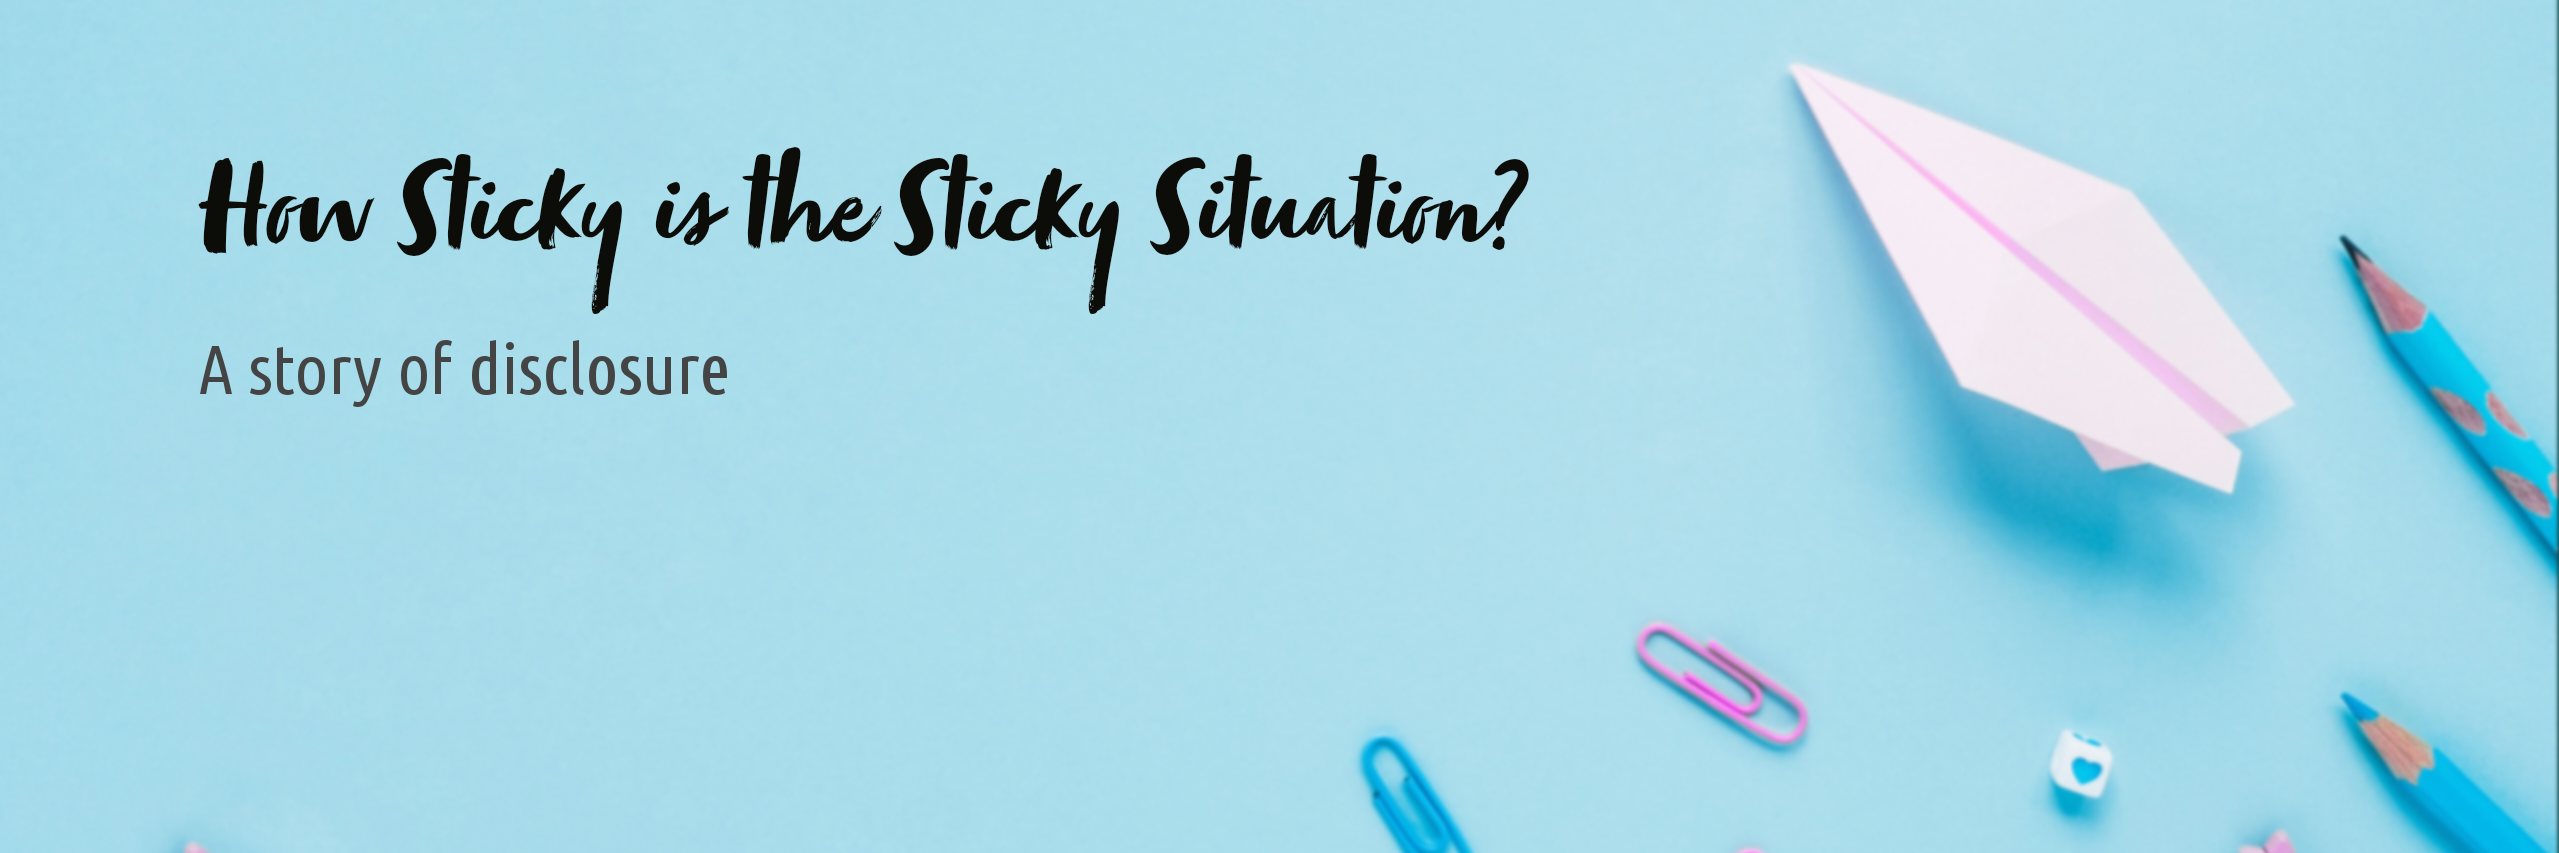 How sticky is the sticky situation?